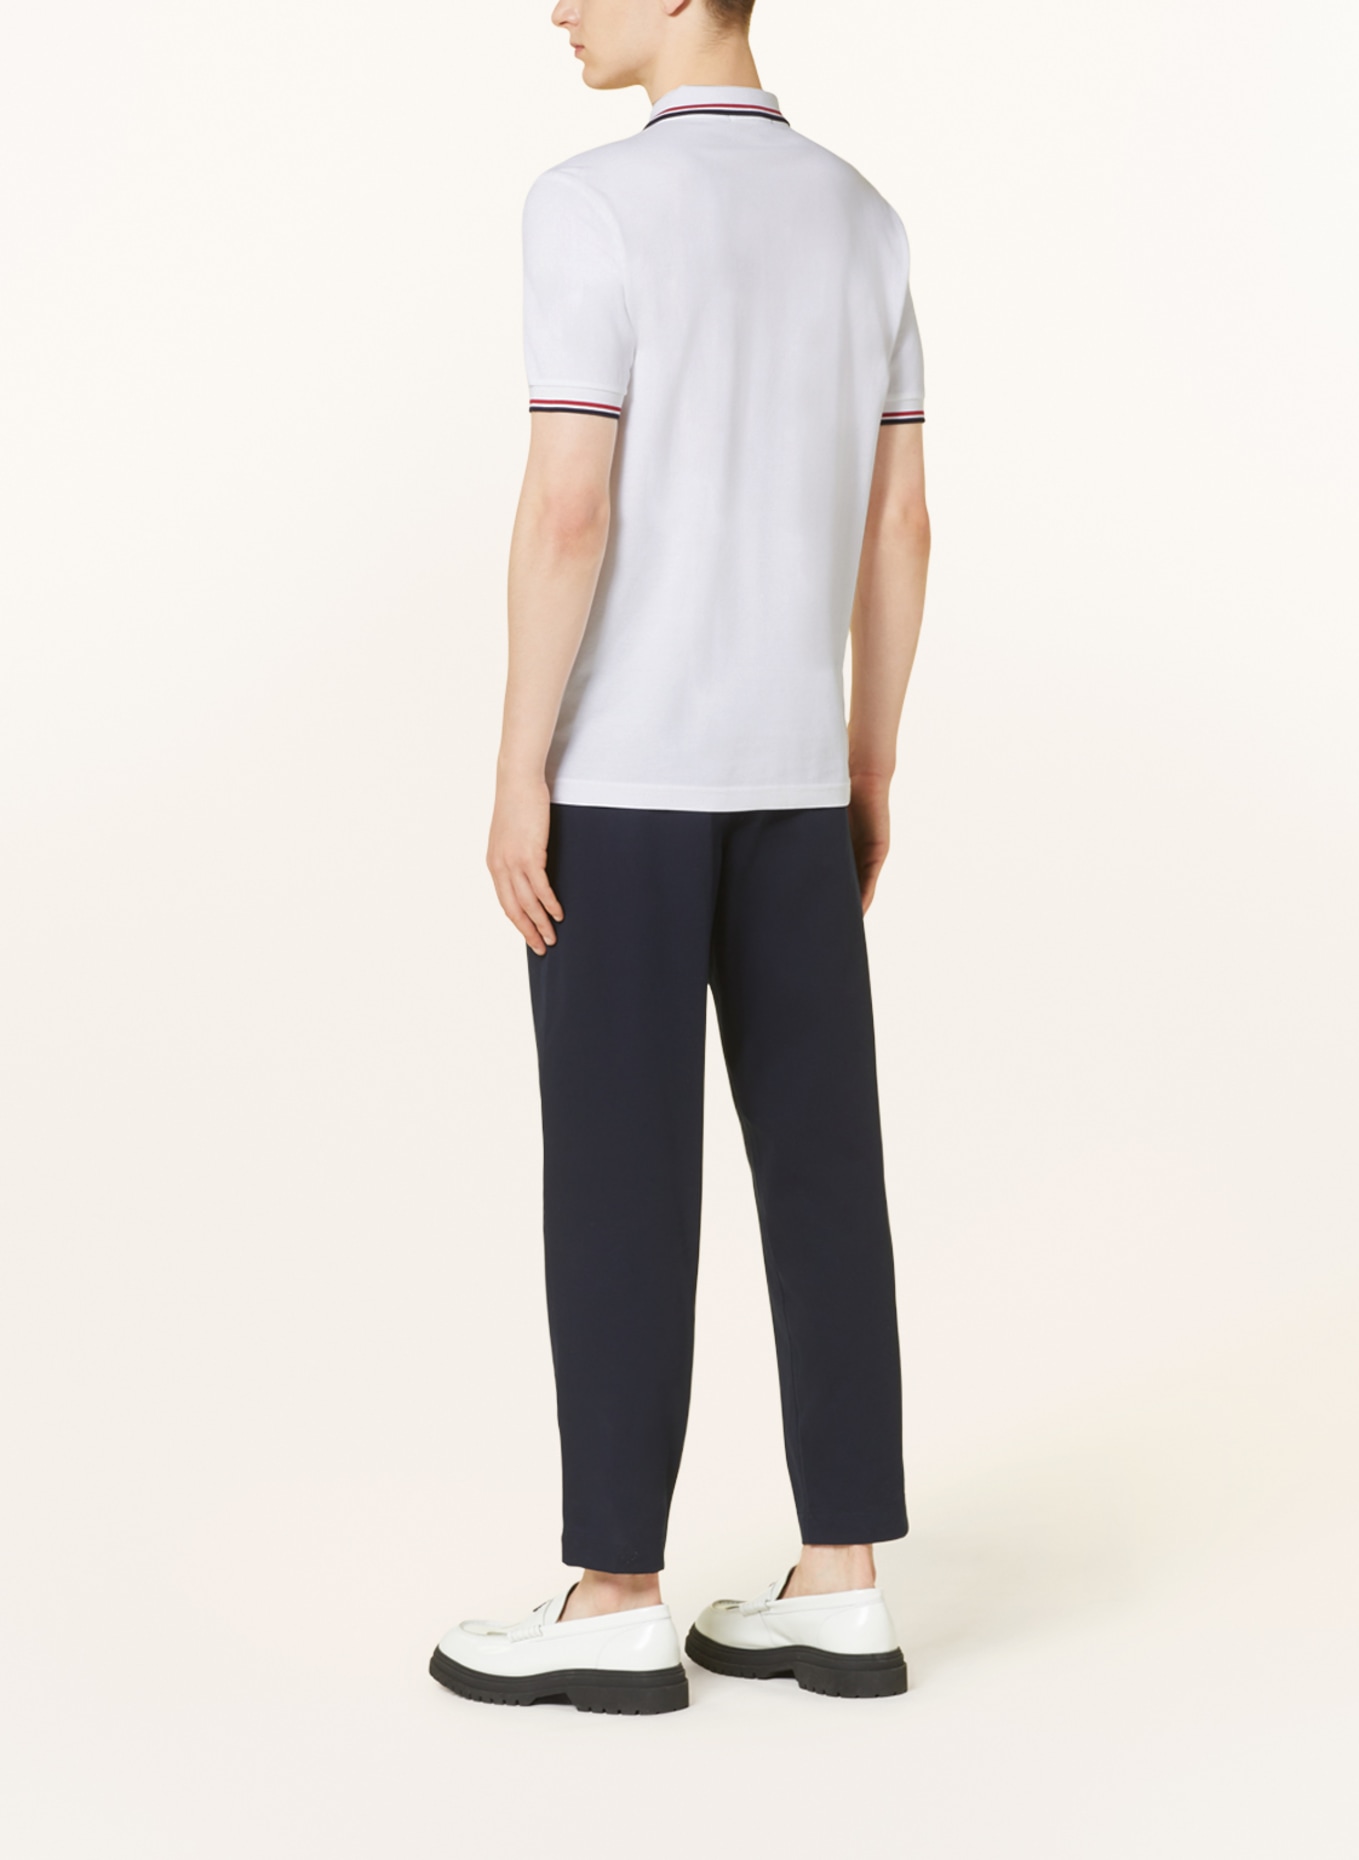 FRED PERRY Piqué-Poloshirt M3600 Straight Fit, Farbe: WEISS (Bild 3)